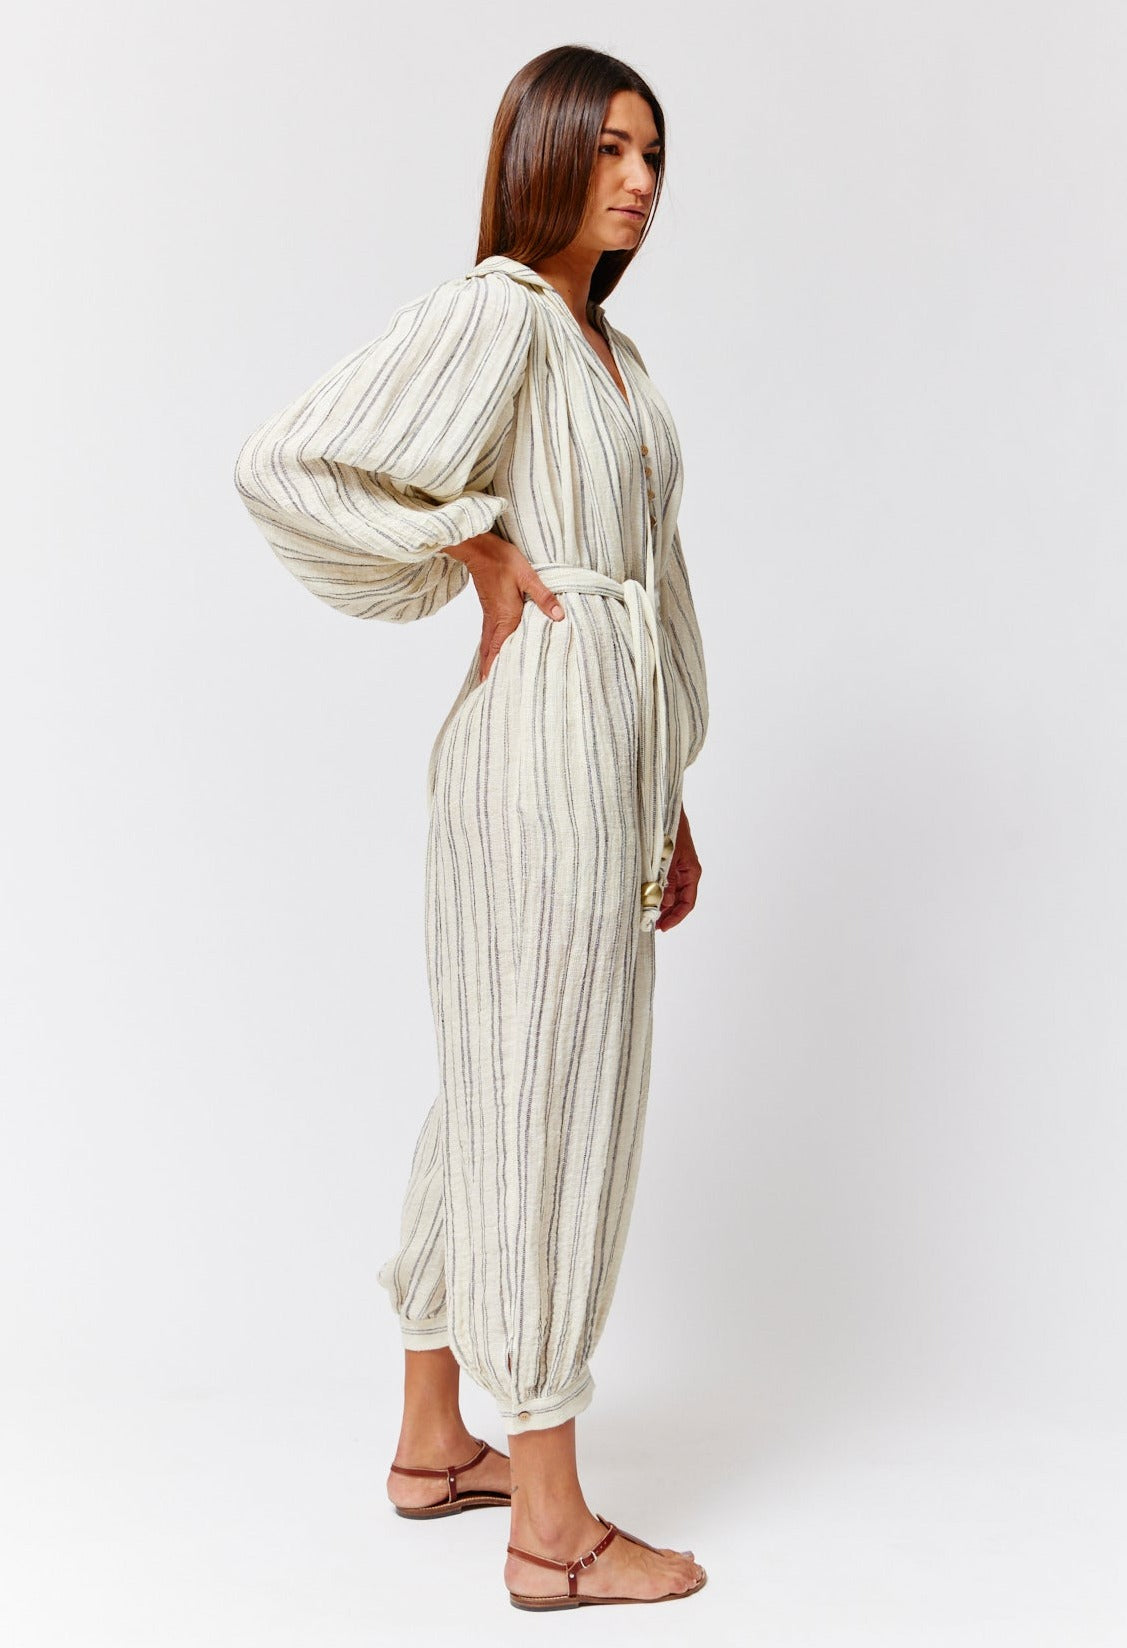 THE POET JUMPSUIT in NATURAL & BLACK STRIPED CHIOS GAUZE